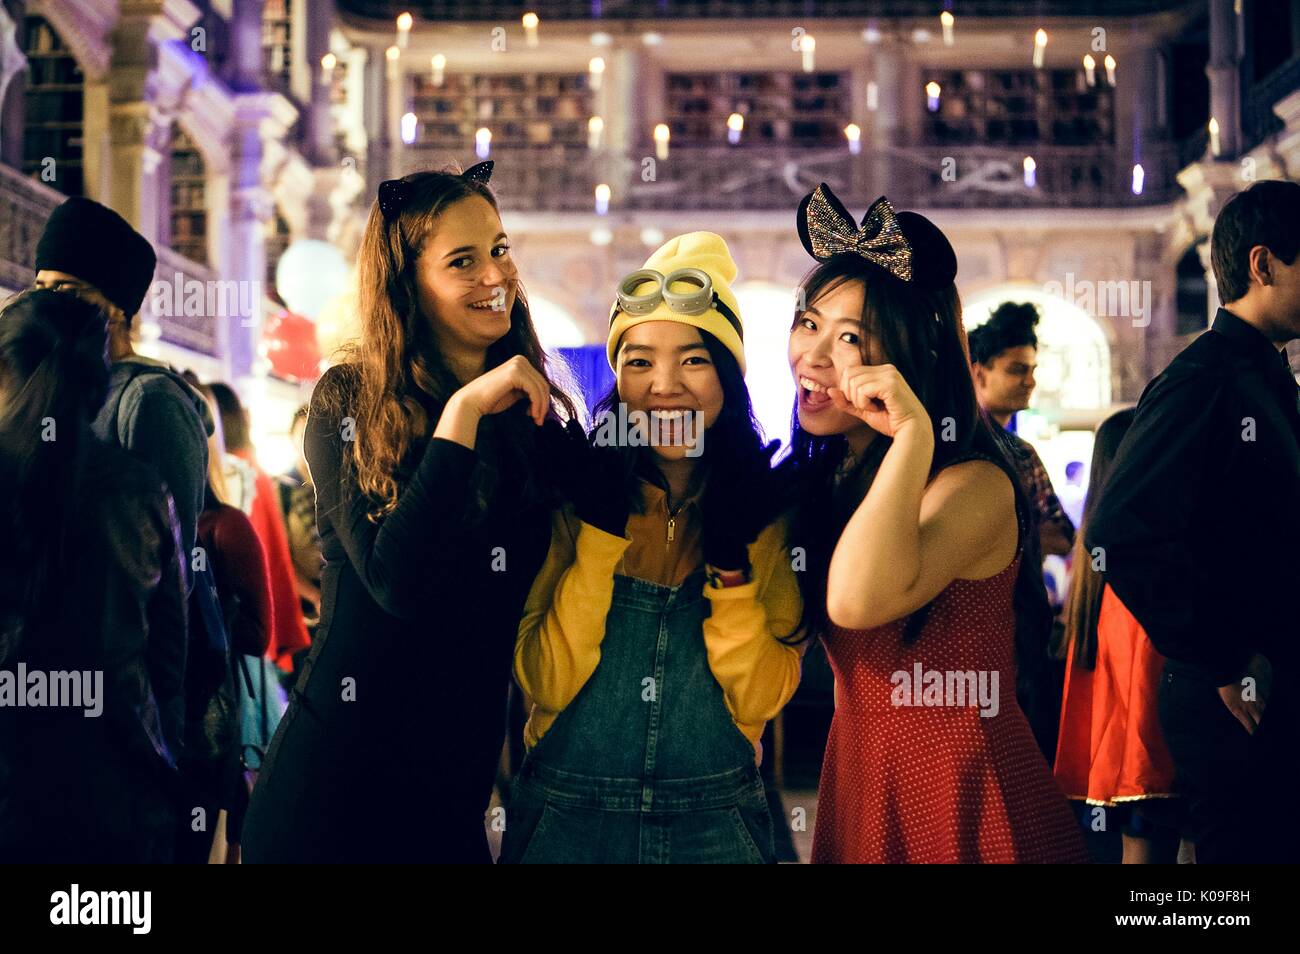 Three college students in costume pose for a photo, the girl on the far left is dressed as a black cat, the girl in the middle is dressed as a minion from the movie 'Despicable Me' and the girl on the far right is wearing a red dress and a black bow on her head, 2016. Stock Photo